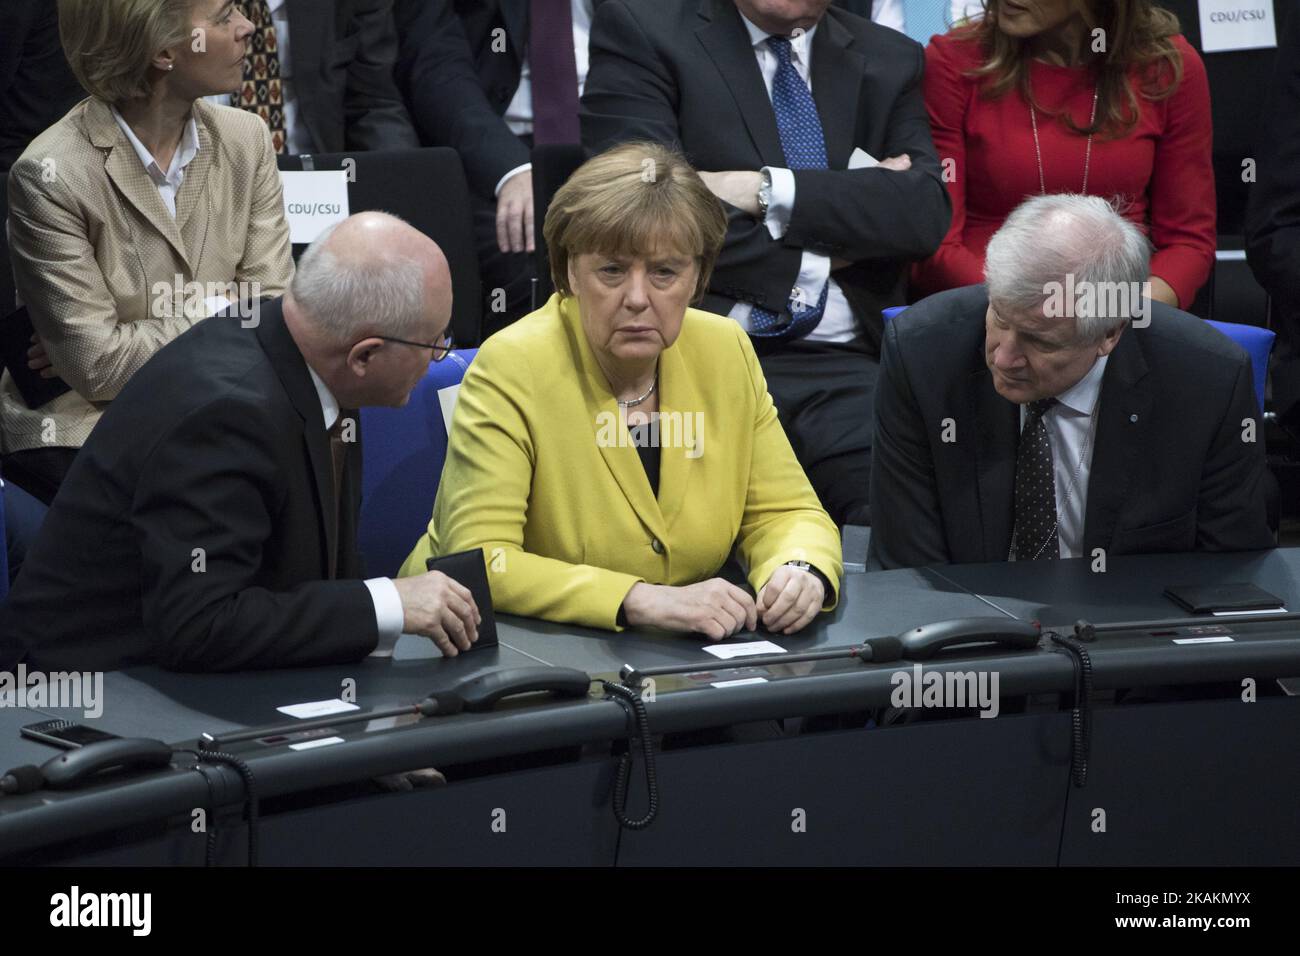 German Chancellor Angela Merkel (C), President of Bavaria Horst Seehofer (R) and chairman of the CDU/CSU Bundestag faction Volker Kauder (L) during the vote for the presidential election by the Bundesversammlung (Federal Assembly) at the Reichstag in Berlin, Germany on February 12, 2017. Presidential candidate Frank-Walter Steinmeier, 61, is certain to be voted as new President being the official candidate of the government parties CDU/CSU and SPD and supported from FDP and Green party, against poverty researcher Christoph Butterwegge, nominated by the left party Die Linke and Albrecht Glaser, Stock Photo